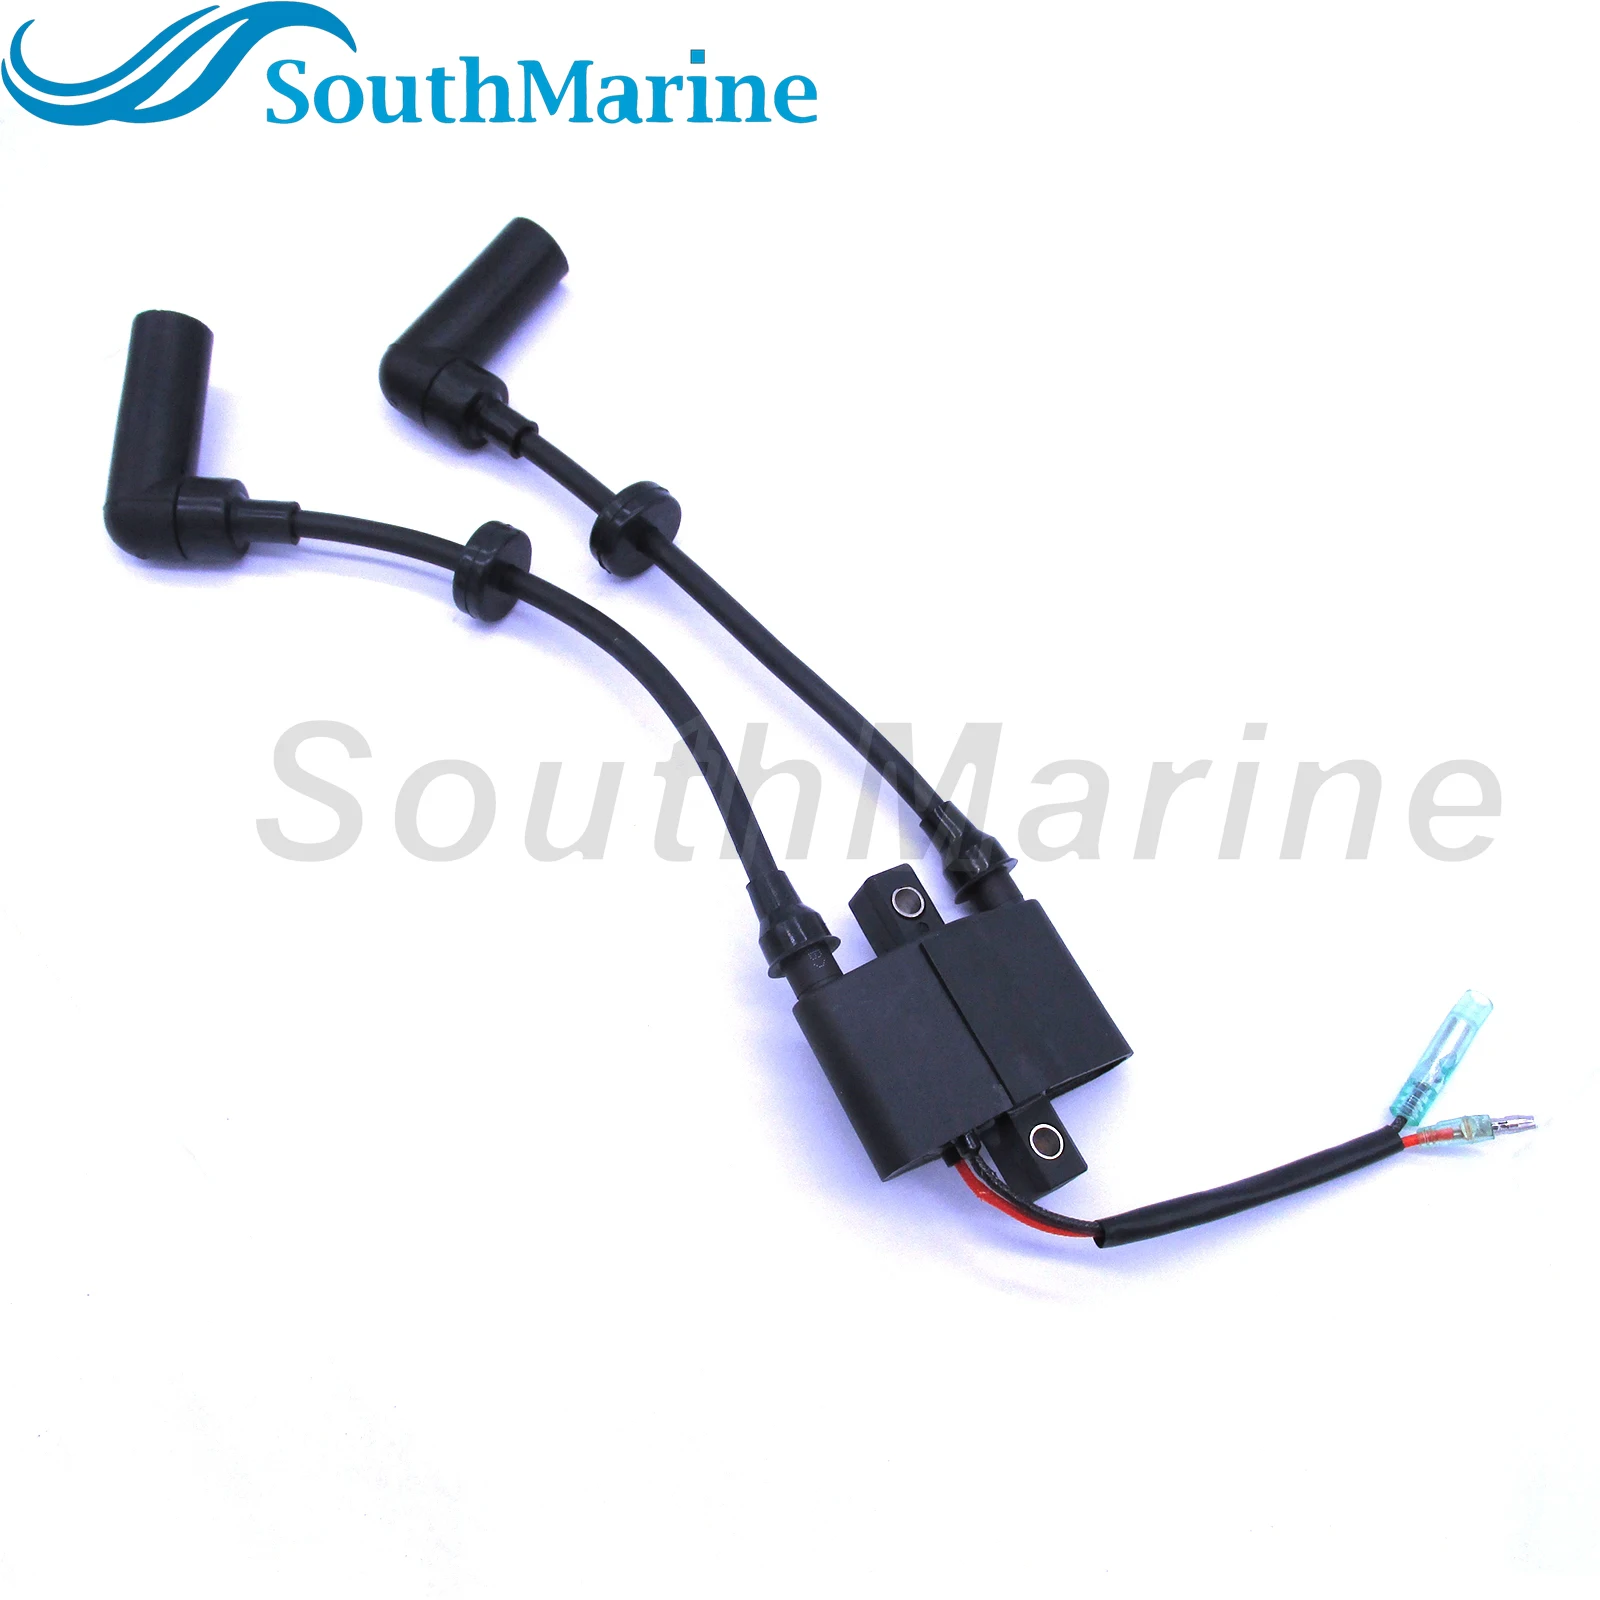 Boat Motor Ignition Coil Assy F15-07000600 for Parsun 4-Stroke F9.9 F13.5 F15 Outboard Engine High Pressure Coil 